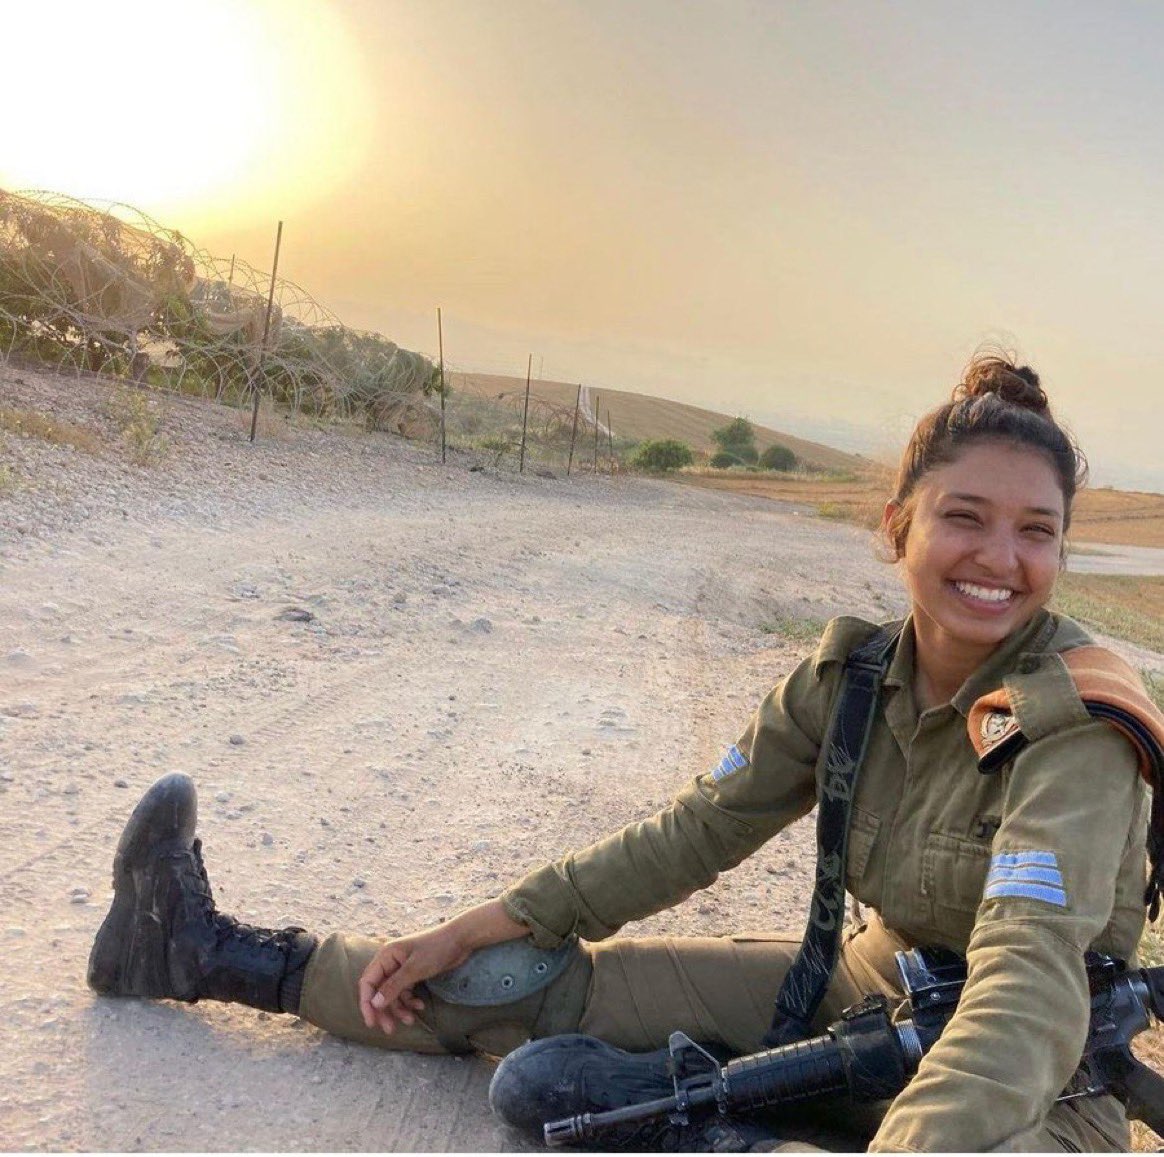 Or Moses z'l, 22, was a commander in the Extraction and Rescue Unit. On October 7, when she realized that terrorists had infiltrated her army base Zikim, Or and 13 other soldiers told 90 recruits (young soldiers) and staff to hide in the shelter and went out to fight the…